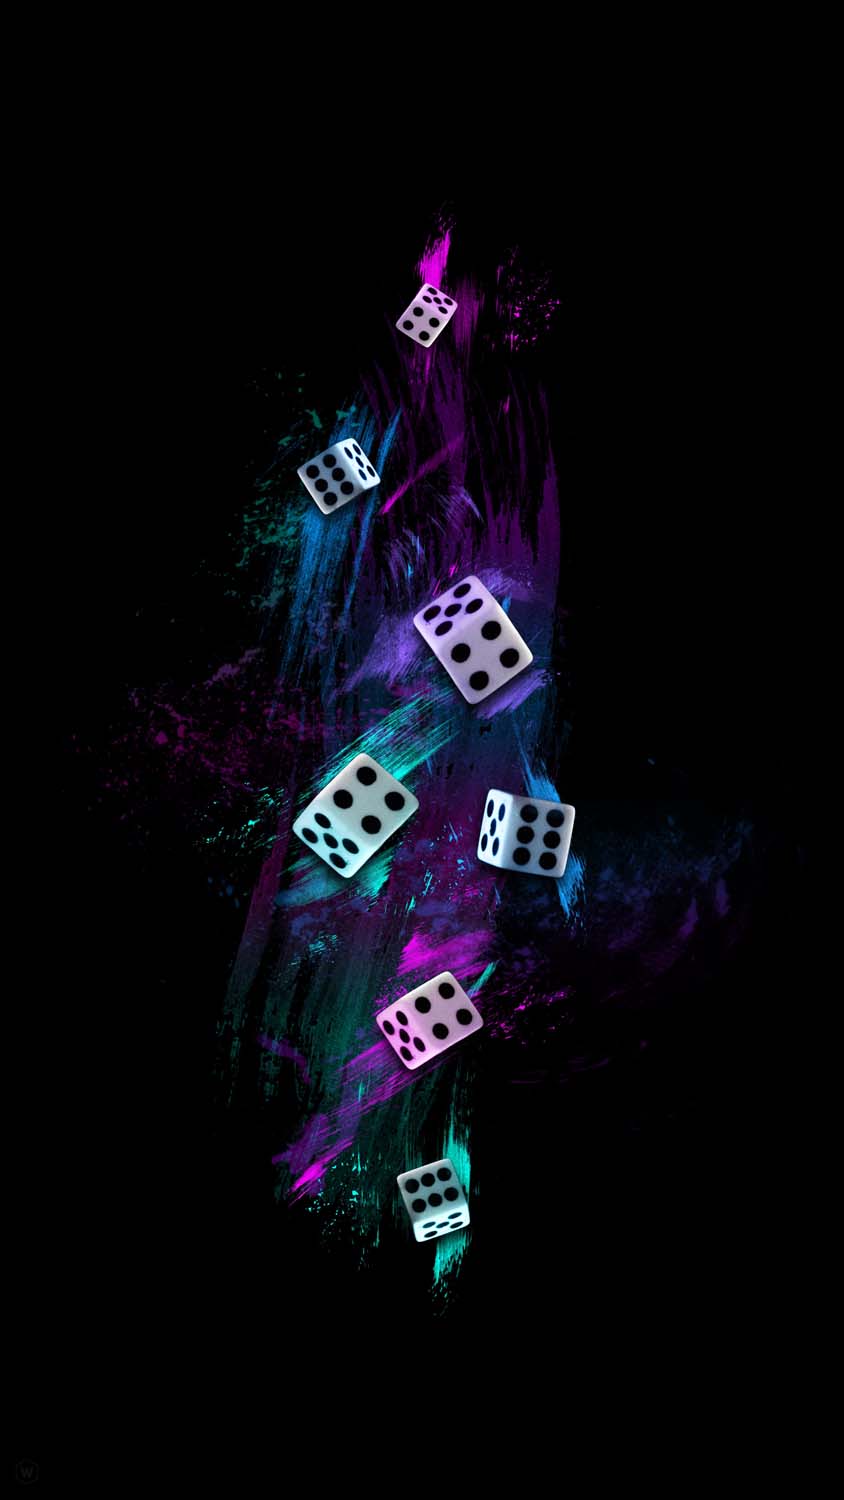 Dices IPhone Wallpaper HD IPhone Wallpapers iPhone Wallpapers